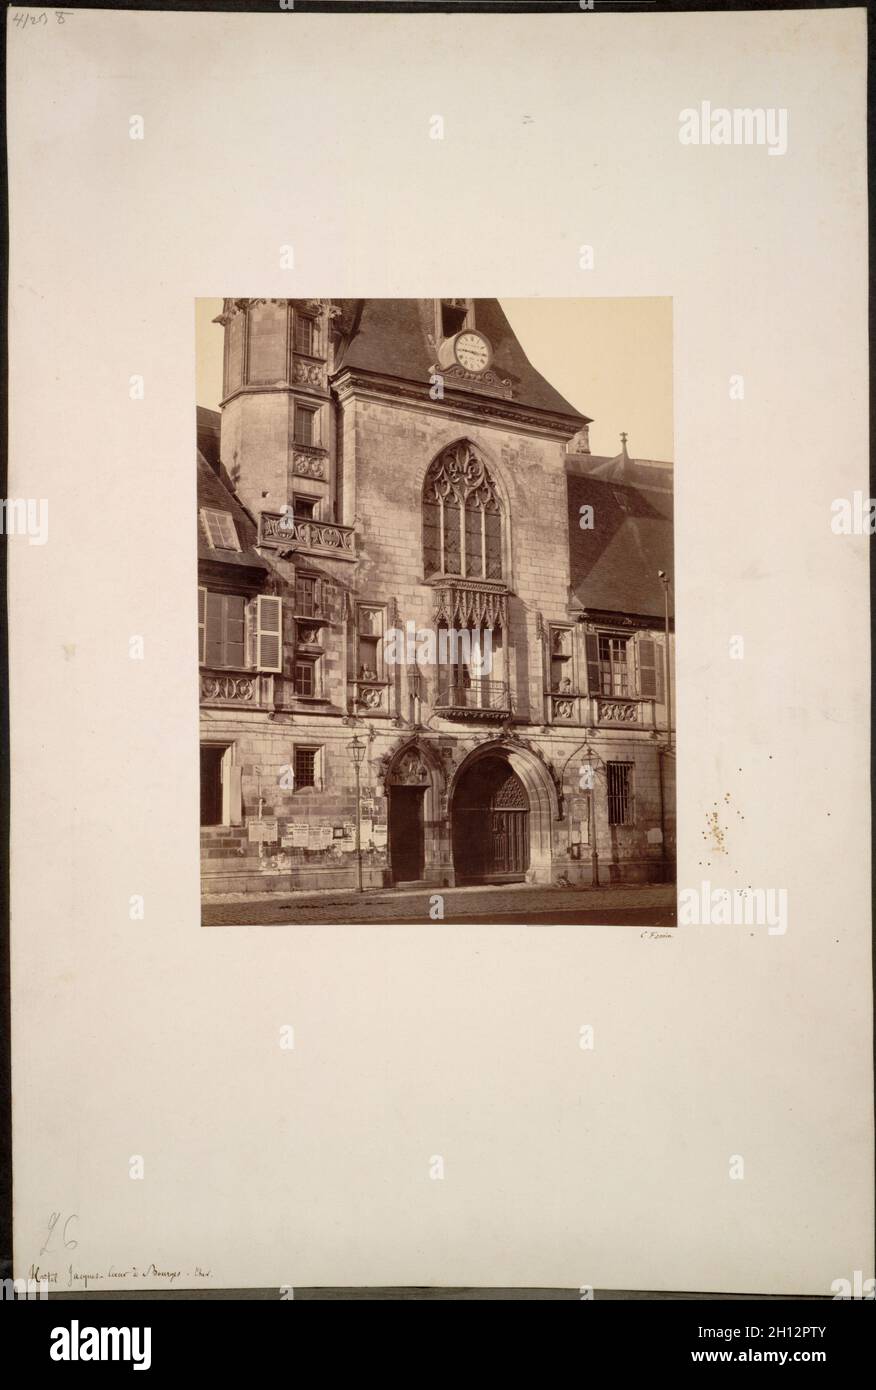 Hotel Jacques Coeur at Bourges, c. 1865. Constant Alexandre Famin (French, 1827-1888). Albumen print from wet collodion negative; image: 26.1 x 19.7 cm (10 1/4 x 7 3/4 in.); mounted: 52.9 x 35.5 cm (20 13/16 x 14 in.); matted: 55.9 x 45.7 cm (22 x 18 in.). Stock Photo